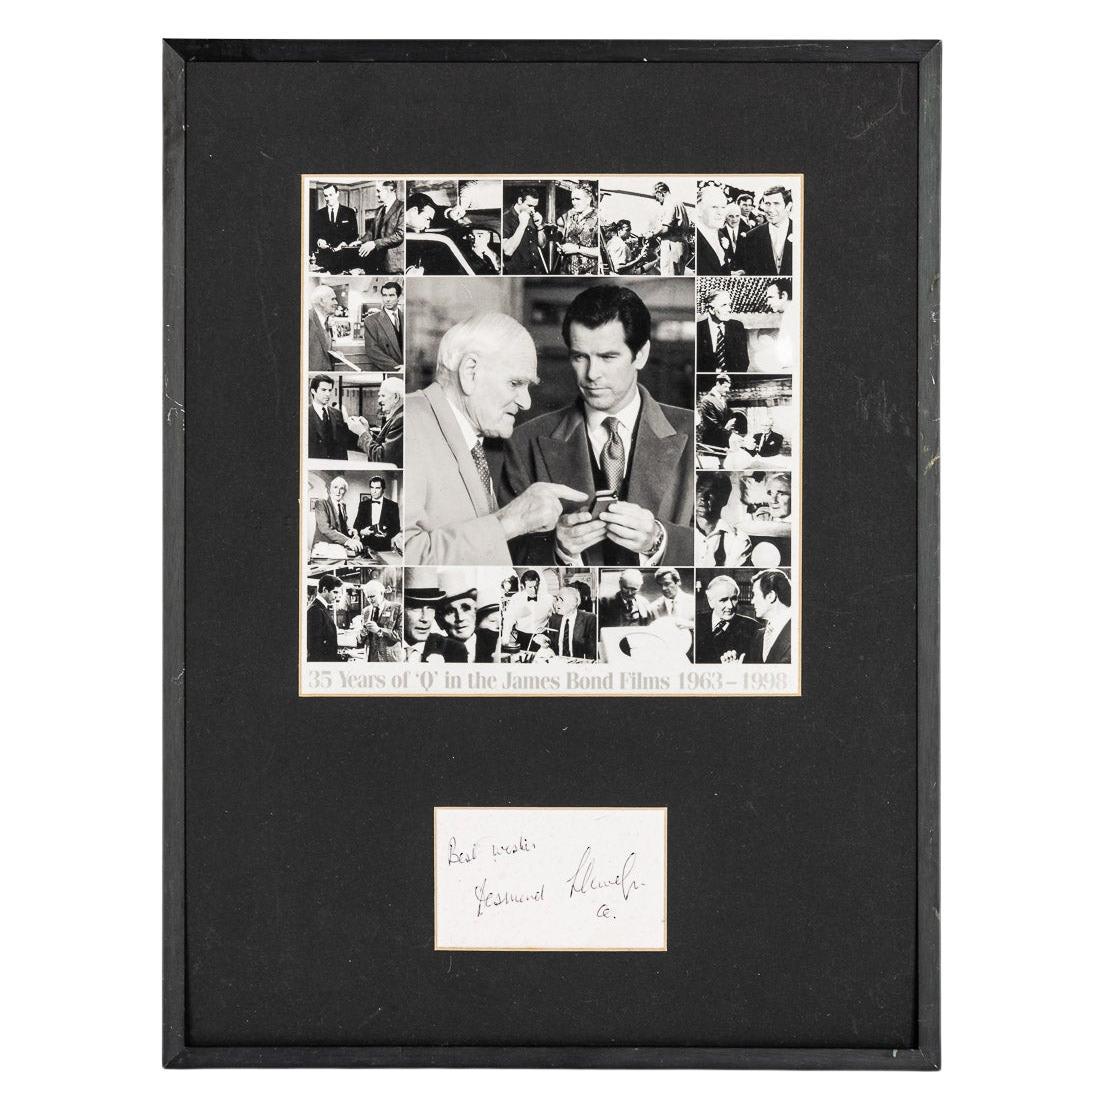 Photo & Signature By Desmond Llewelyn 'Q' (1914 - 1999)